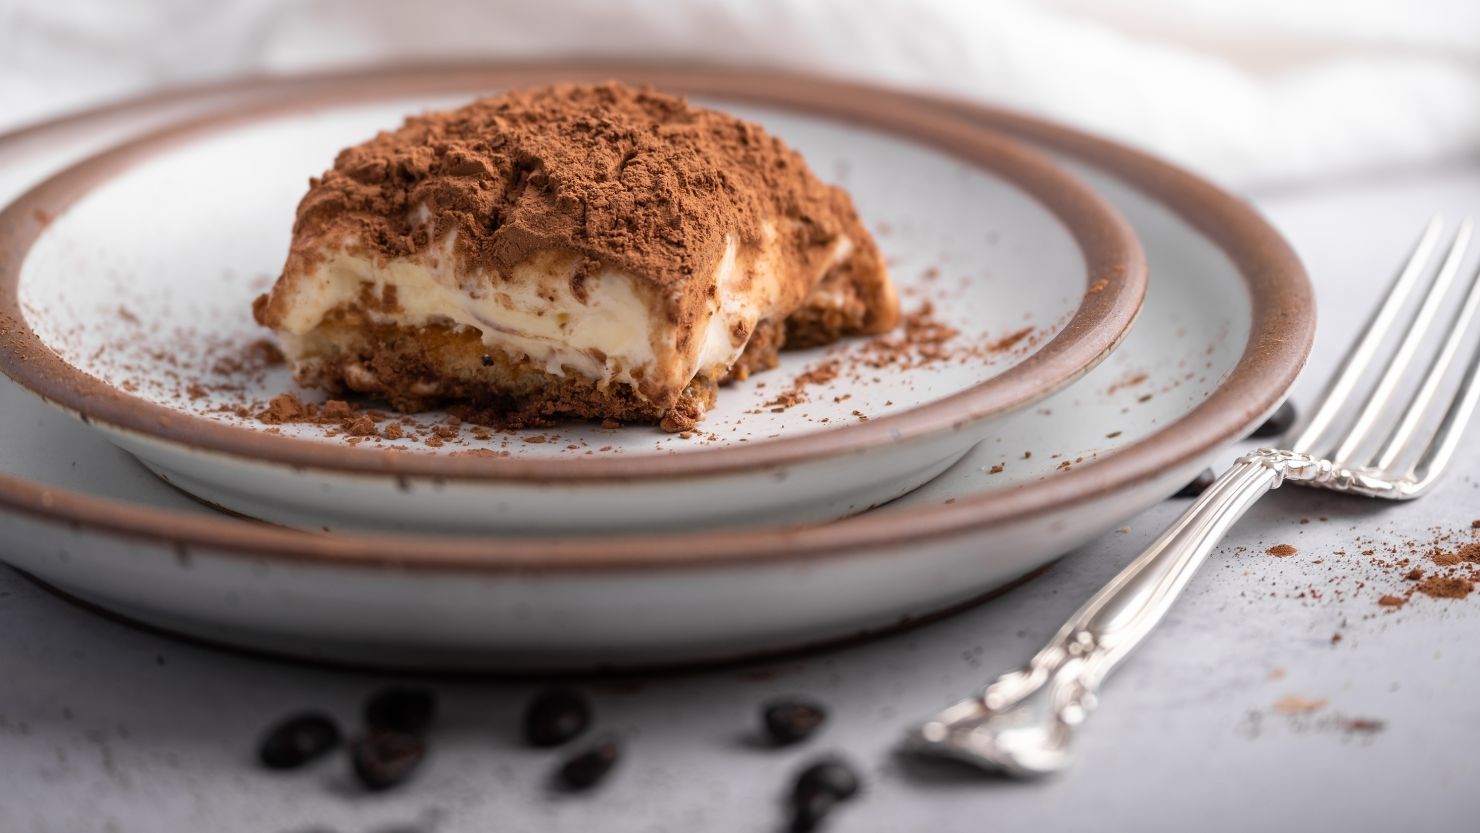 This dessert is the perfect ending to a delicious Italian meal.